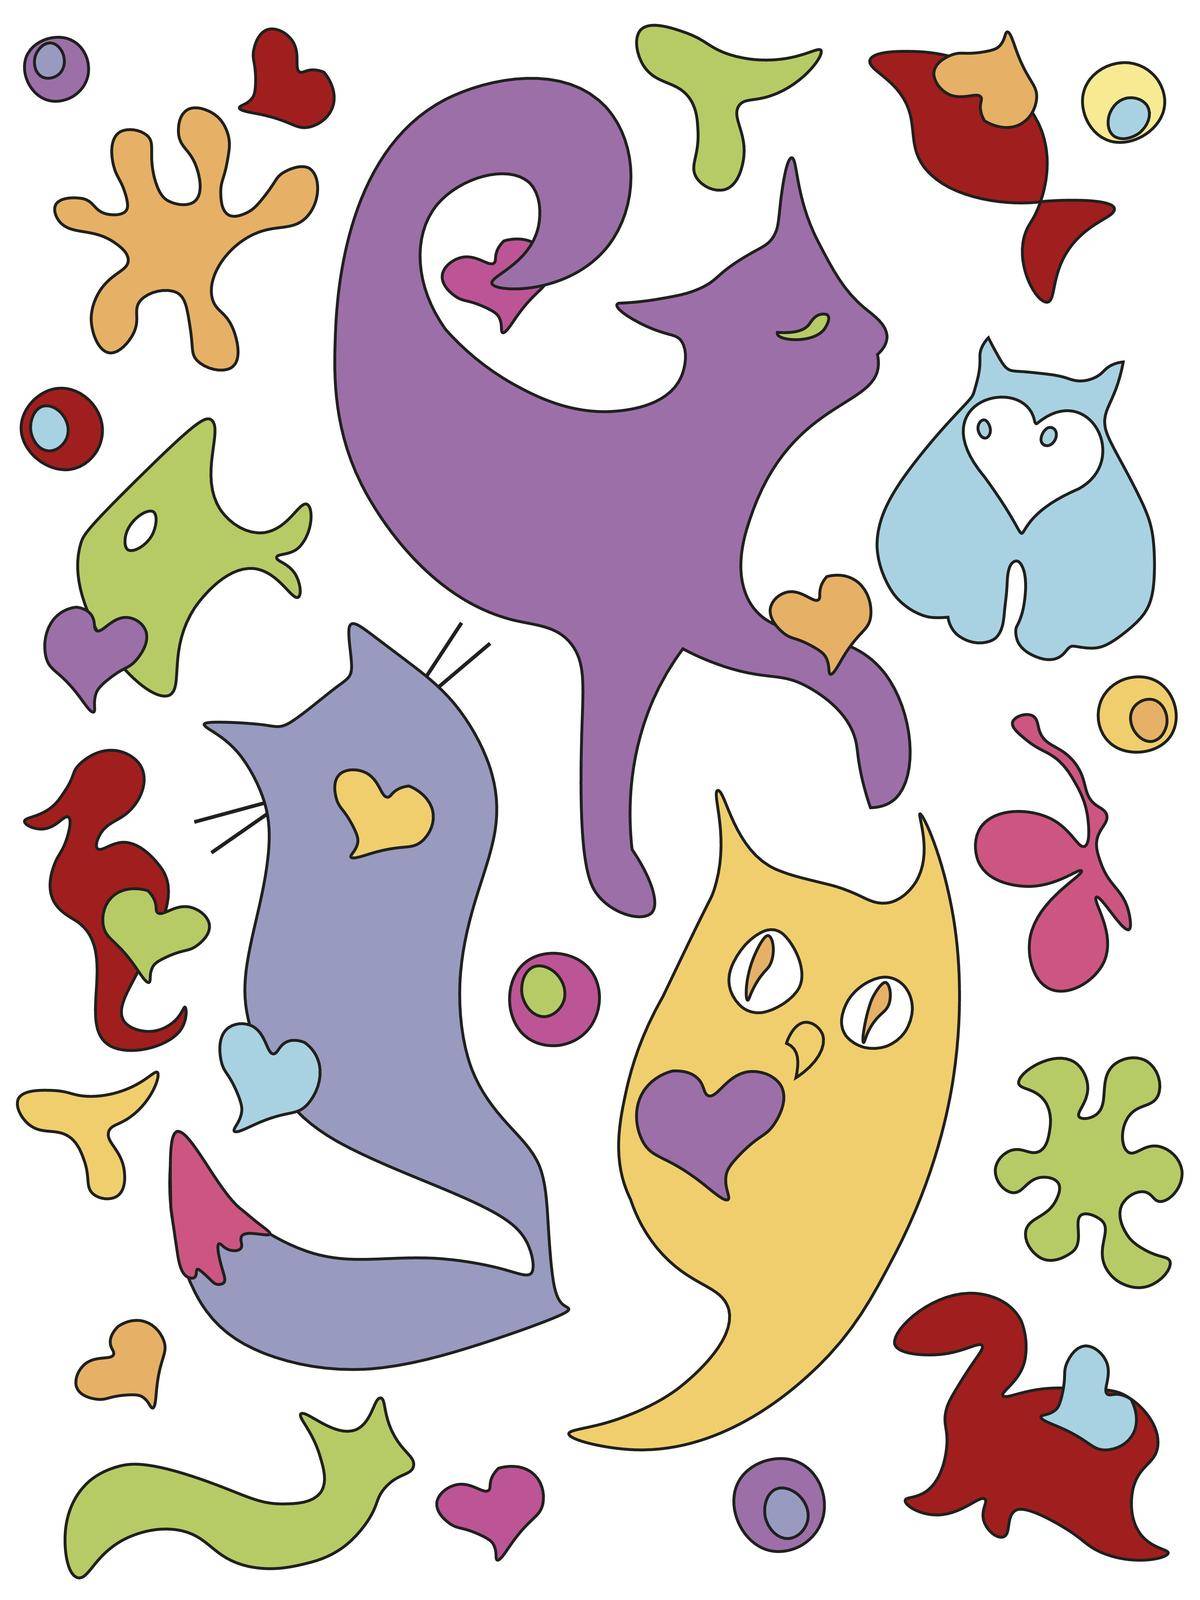 Funny cats, fishes, animal figures. Hand drown doodle style. Seamless pattern for print, fabric, baby dress, design element.